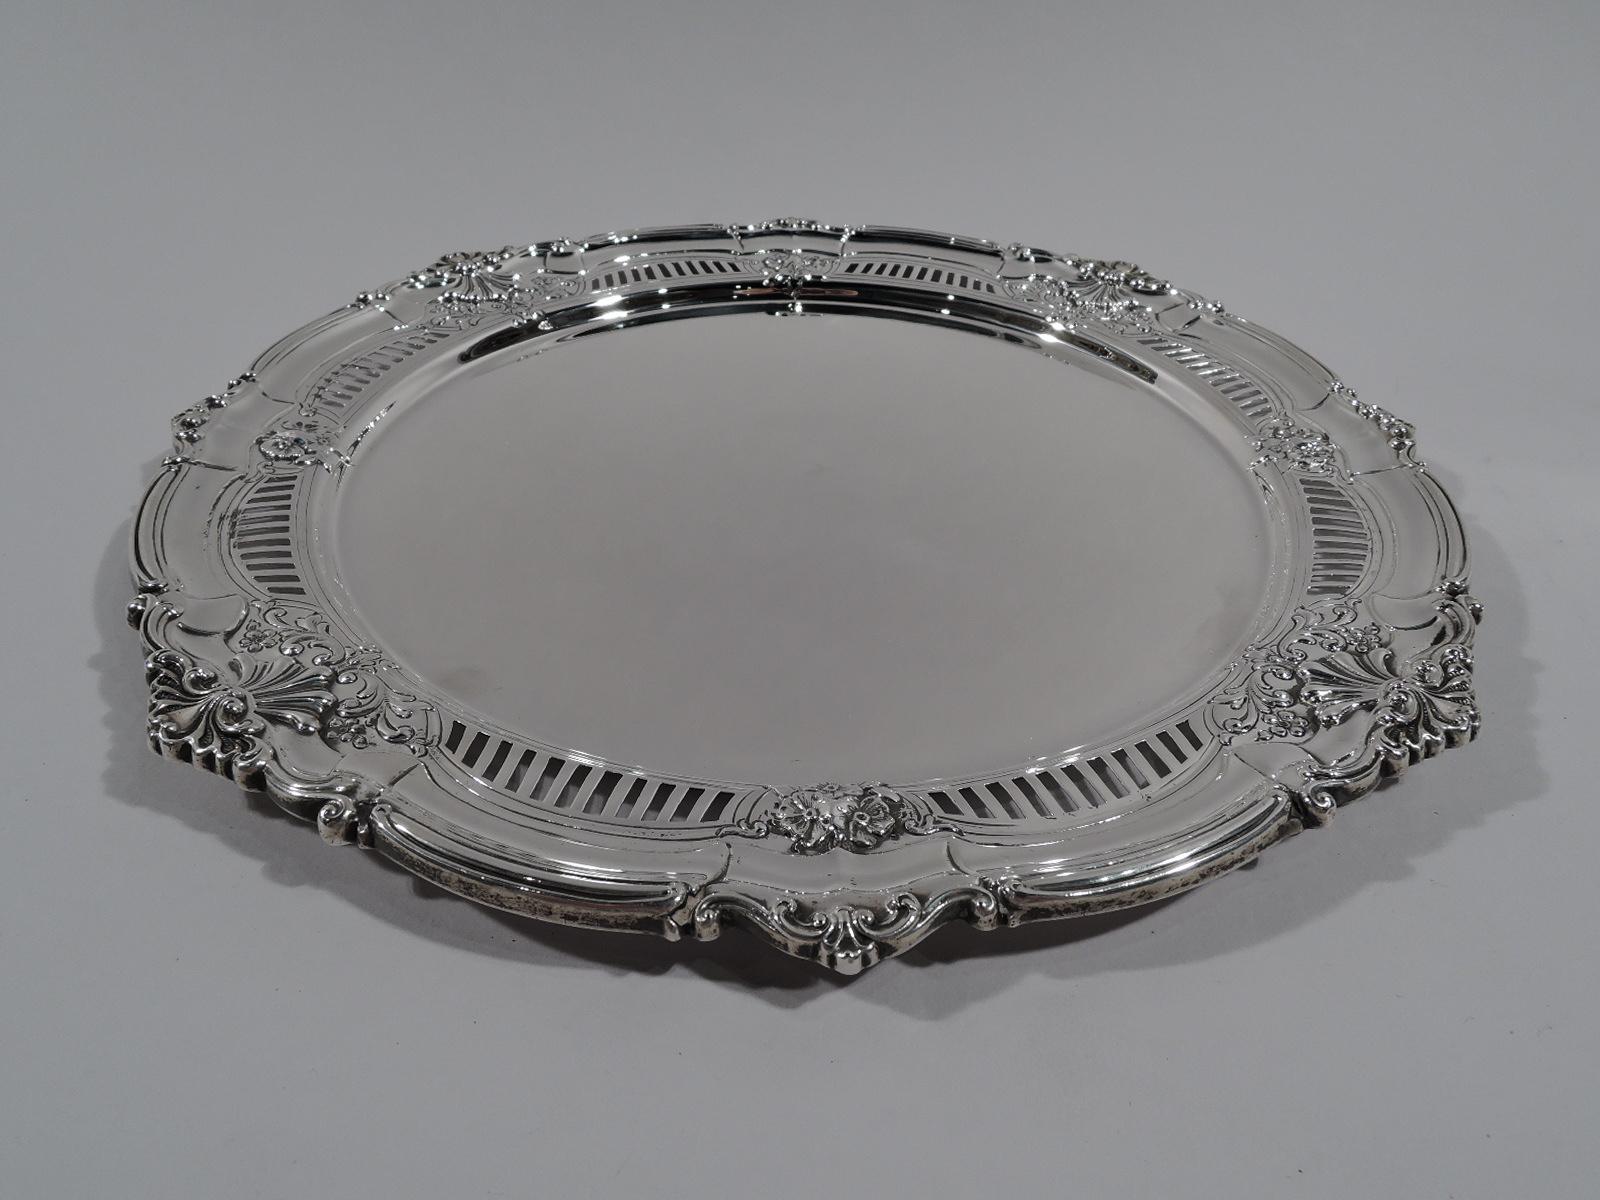 Turn-of-the-century American Edwardian sterling silver cake plate. Round and plain well bordered by linear piercing and applied and chased flowers and scrolls. Rim scrolled and applied with scallop shells. Pretty with a nice size and heft for